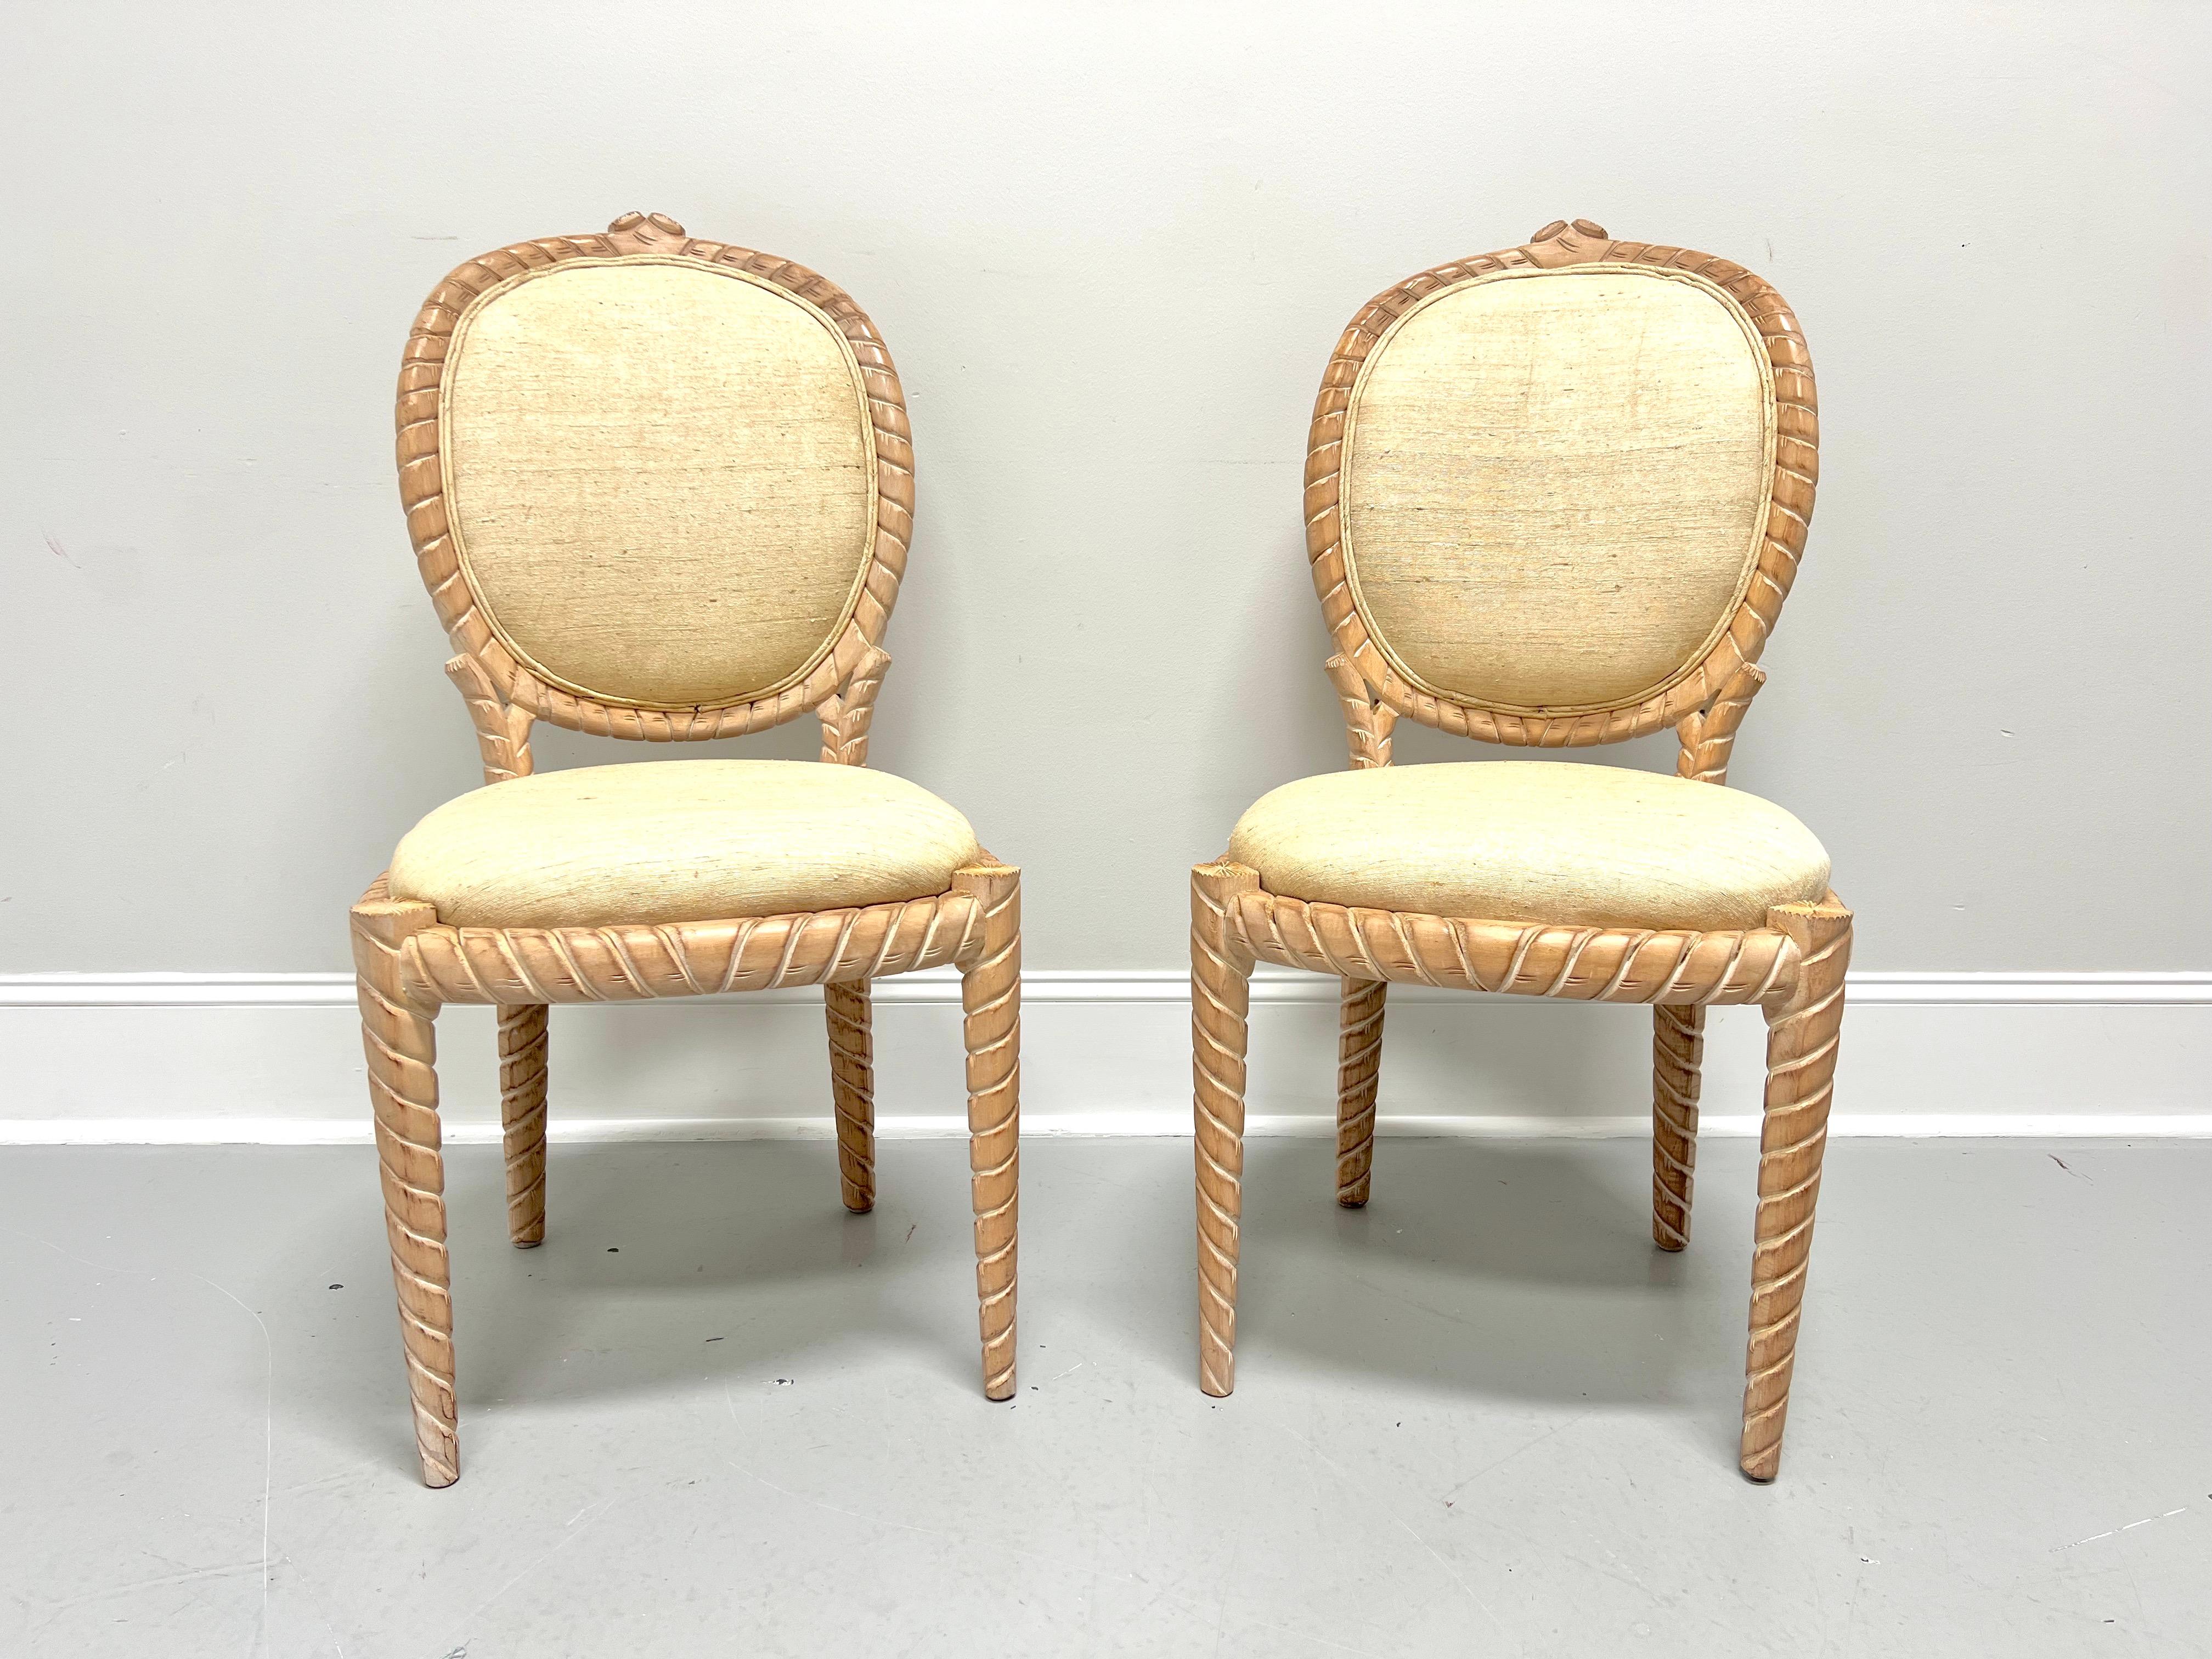 1980's Carved Whitewashed Wood Boho Rope Twist Dining Side Chairs - Pair B For Sale 4